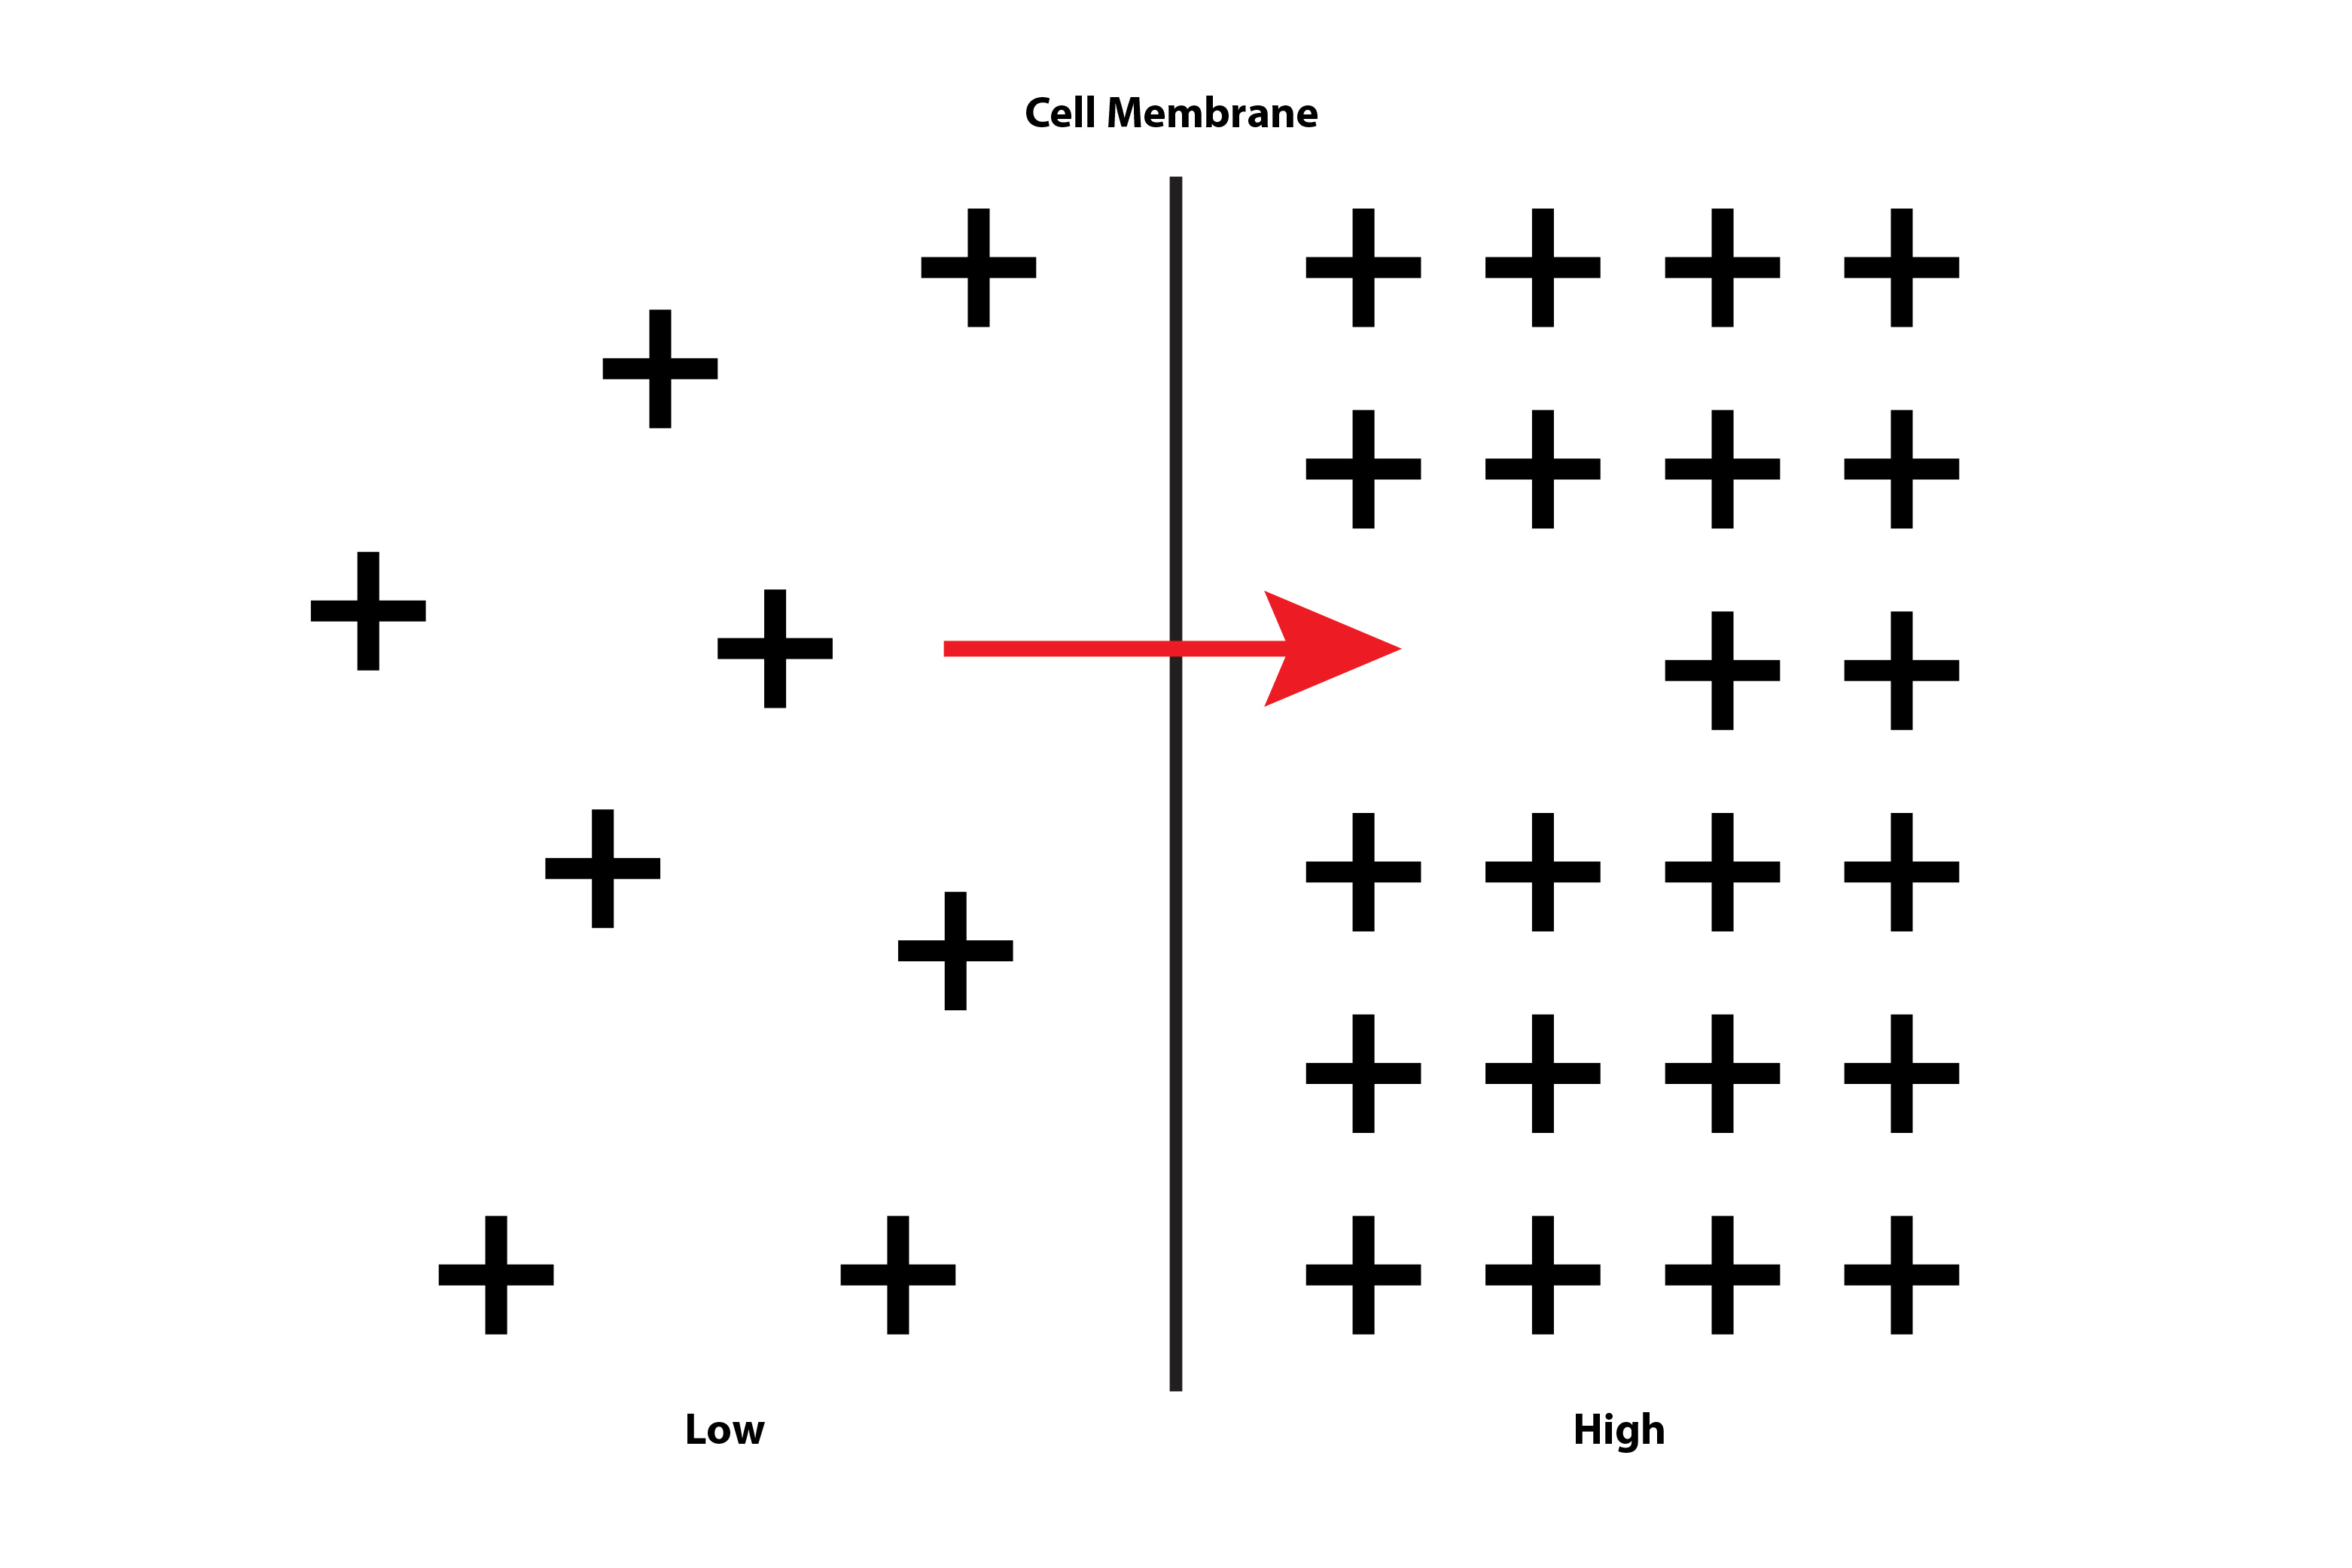 Diagram showing a cell maintaining a balance of protein using energy working against concentration gradients